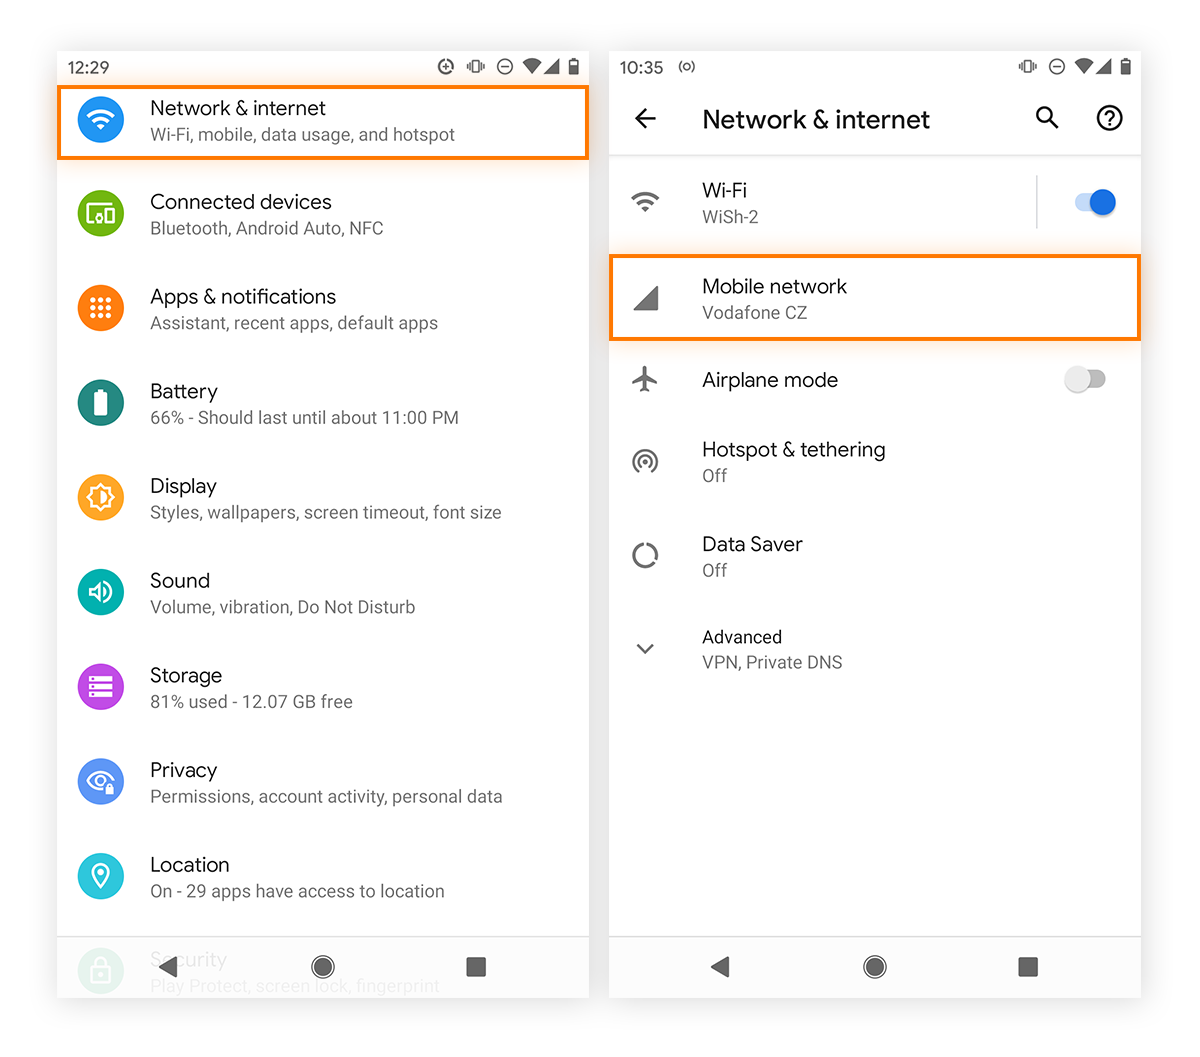 Restrict background data on Android by accessing Mobile network in Settings.